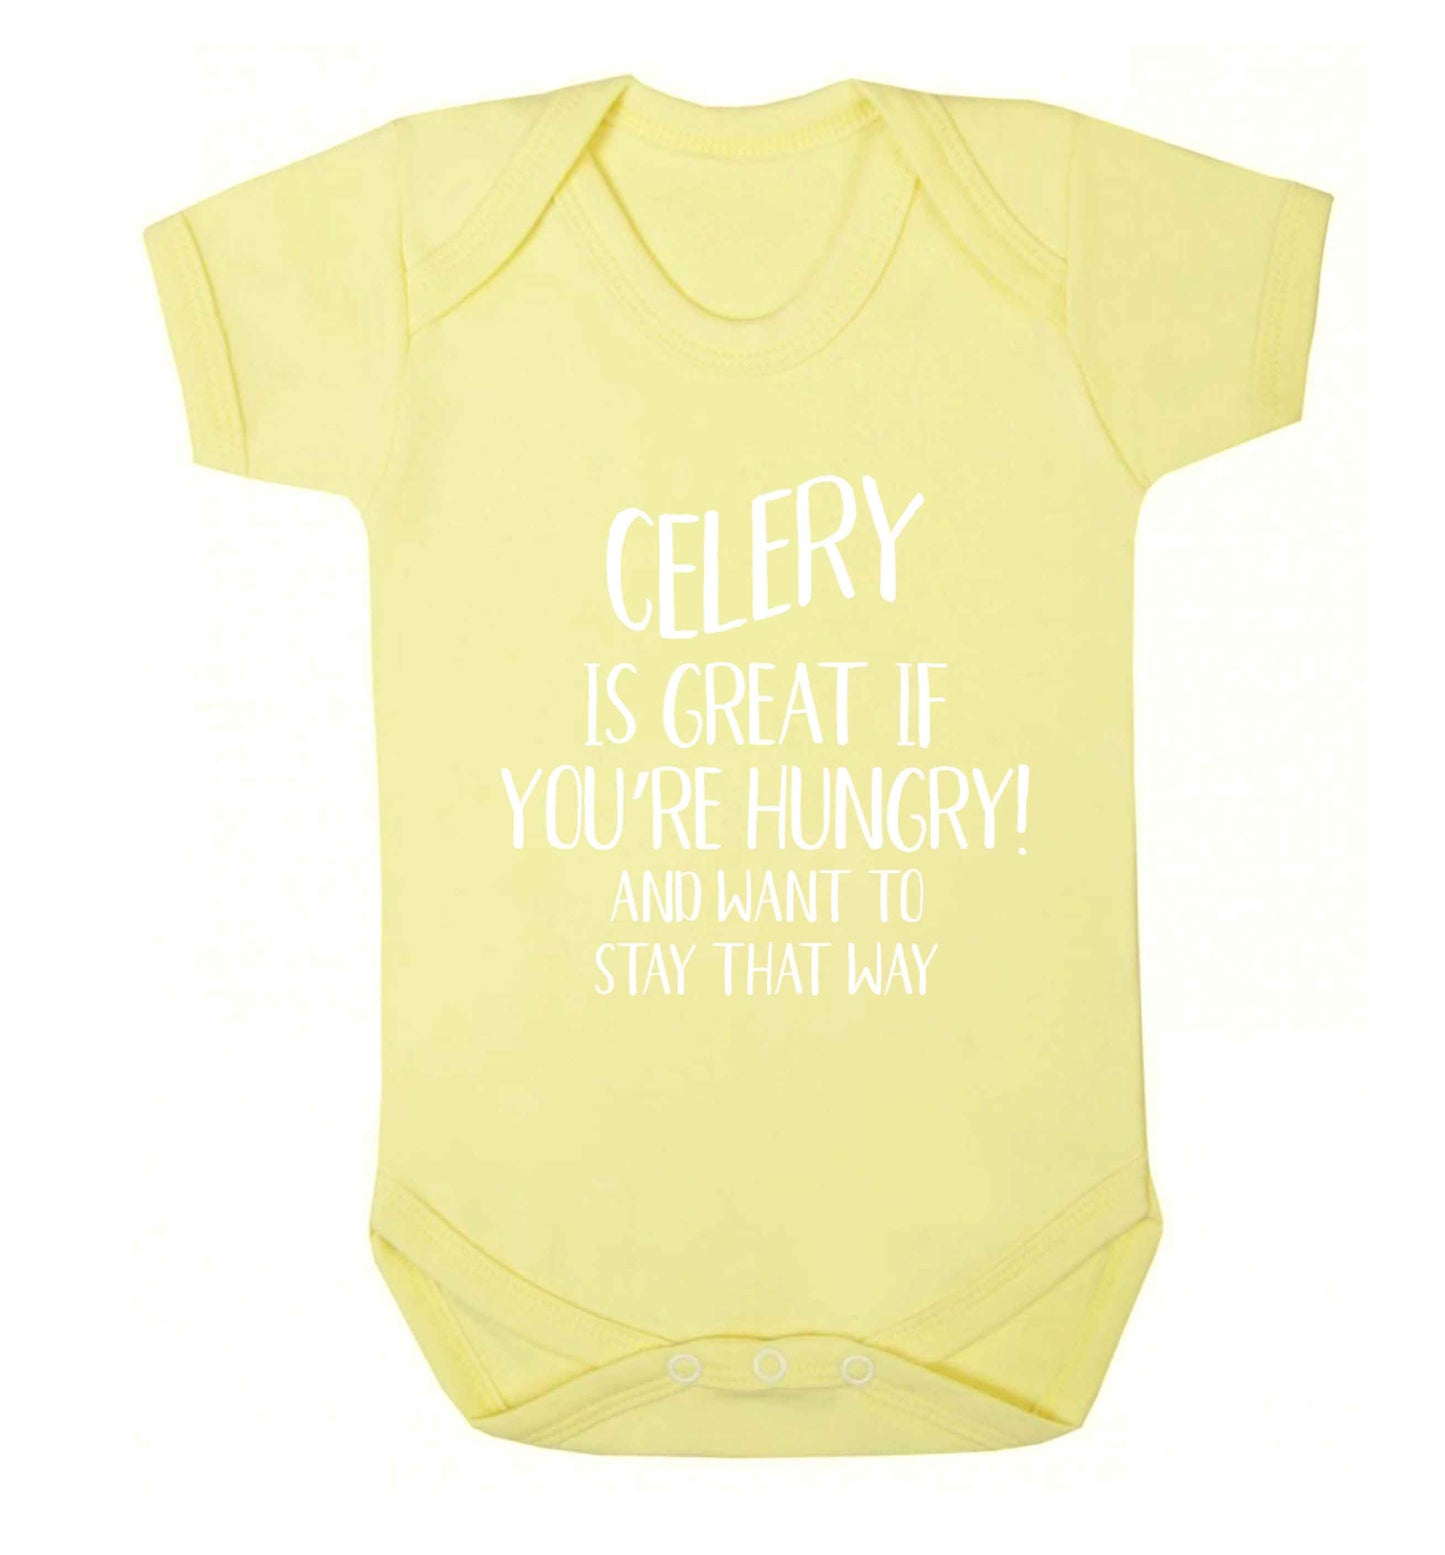 Cellery is great when you're hungry and want to stay that way Baby Vest pale yellow 18-24 months